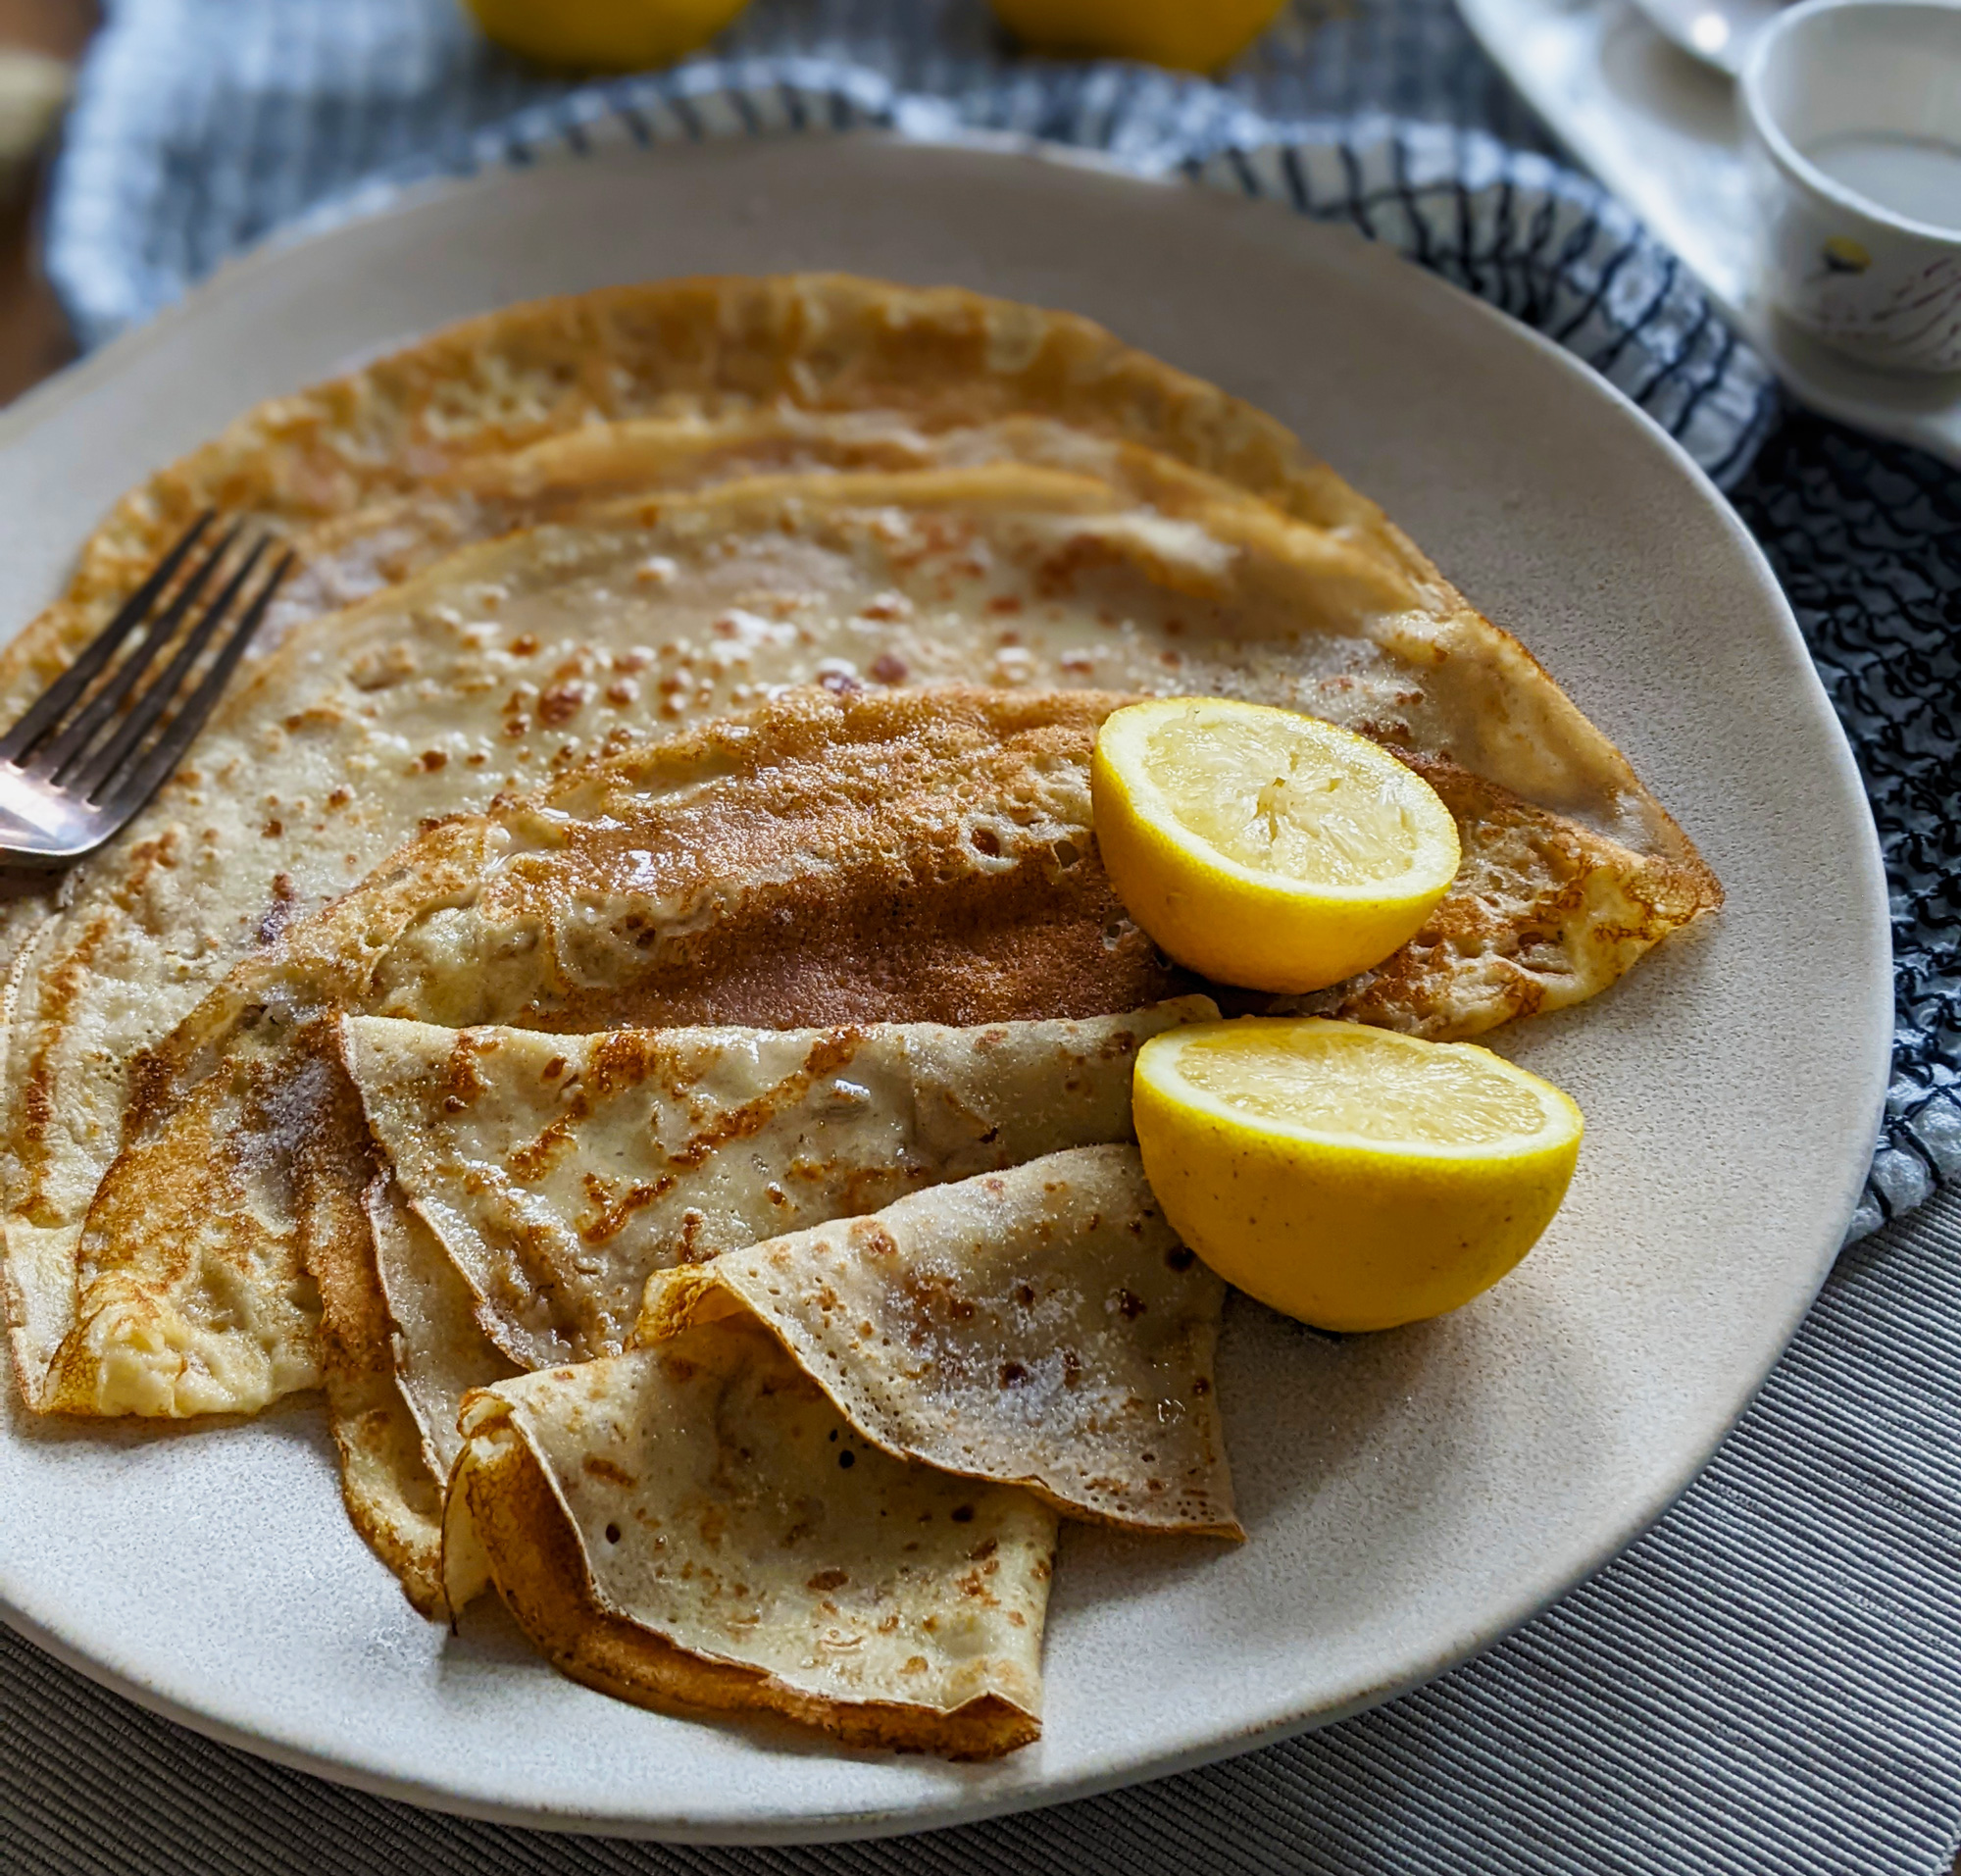 Classic Gluten Free Pancakes (Crepes) - Only 3 Ingredients!